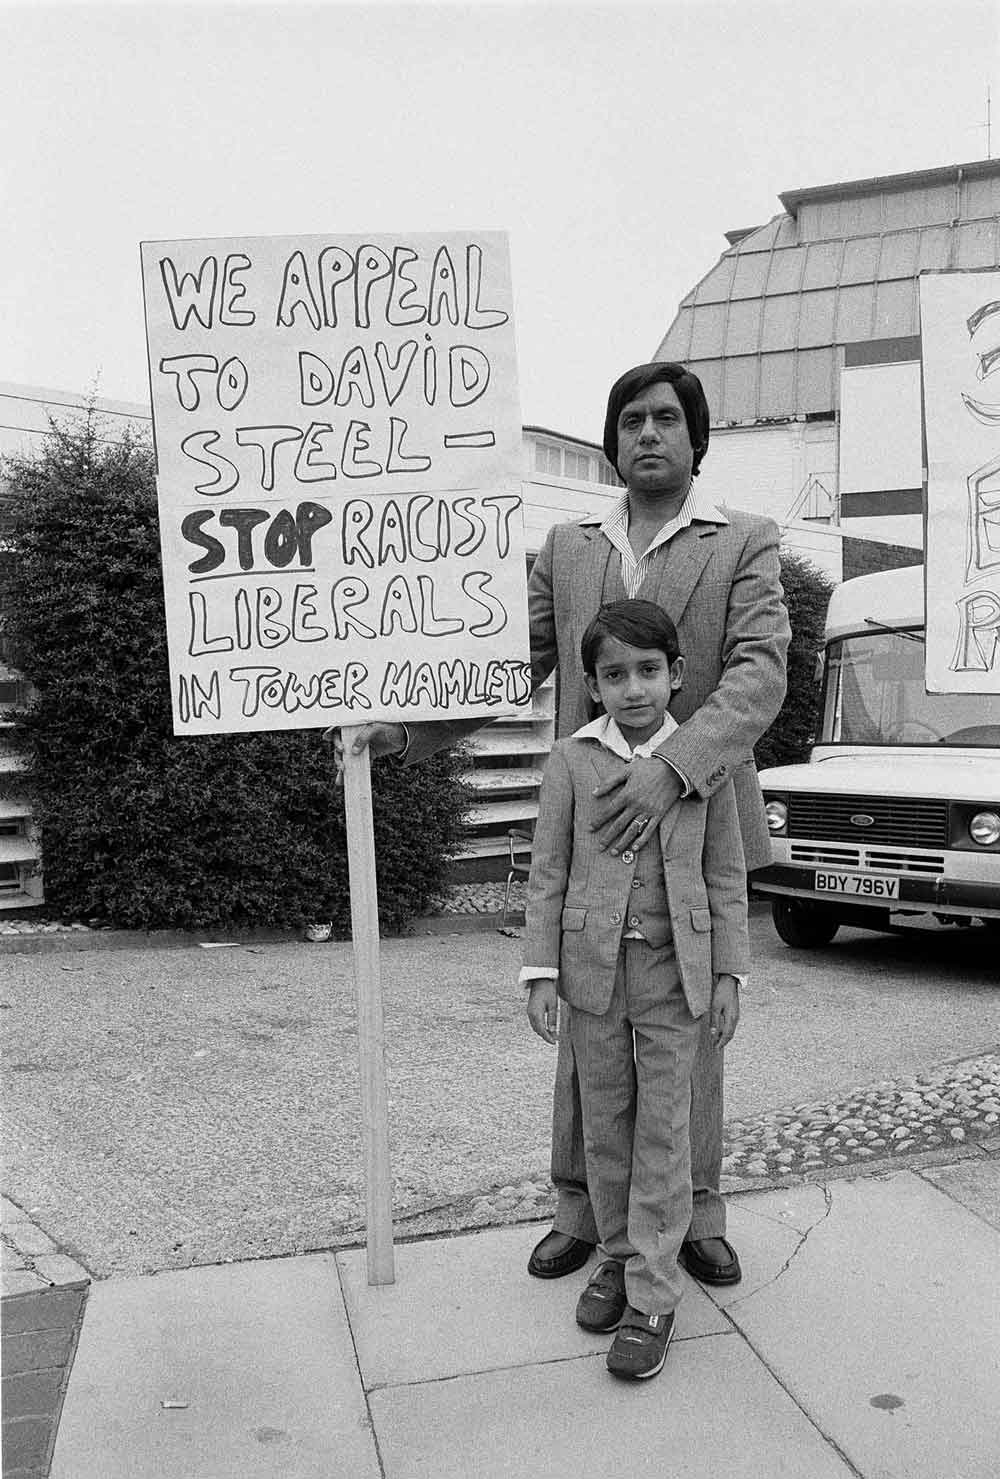 Suited Bengali father and son protesting against Liberal Democrat policy in Tower Hamlets in the 1990s: Images of Housing, Homelessness and Resistance in London's East End, from the Conditions of Living exhibition at Four Corners.